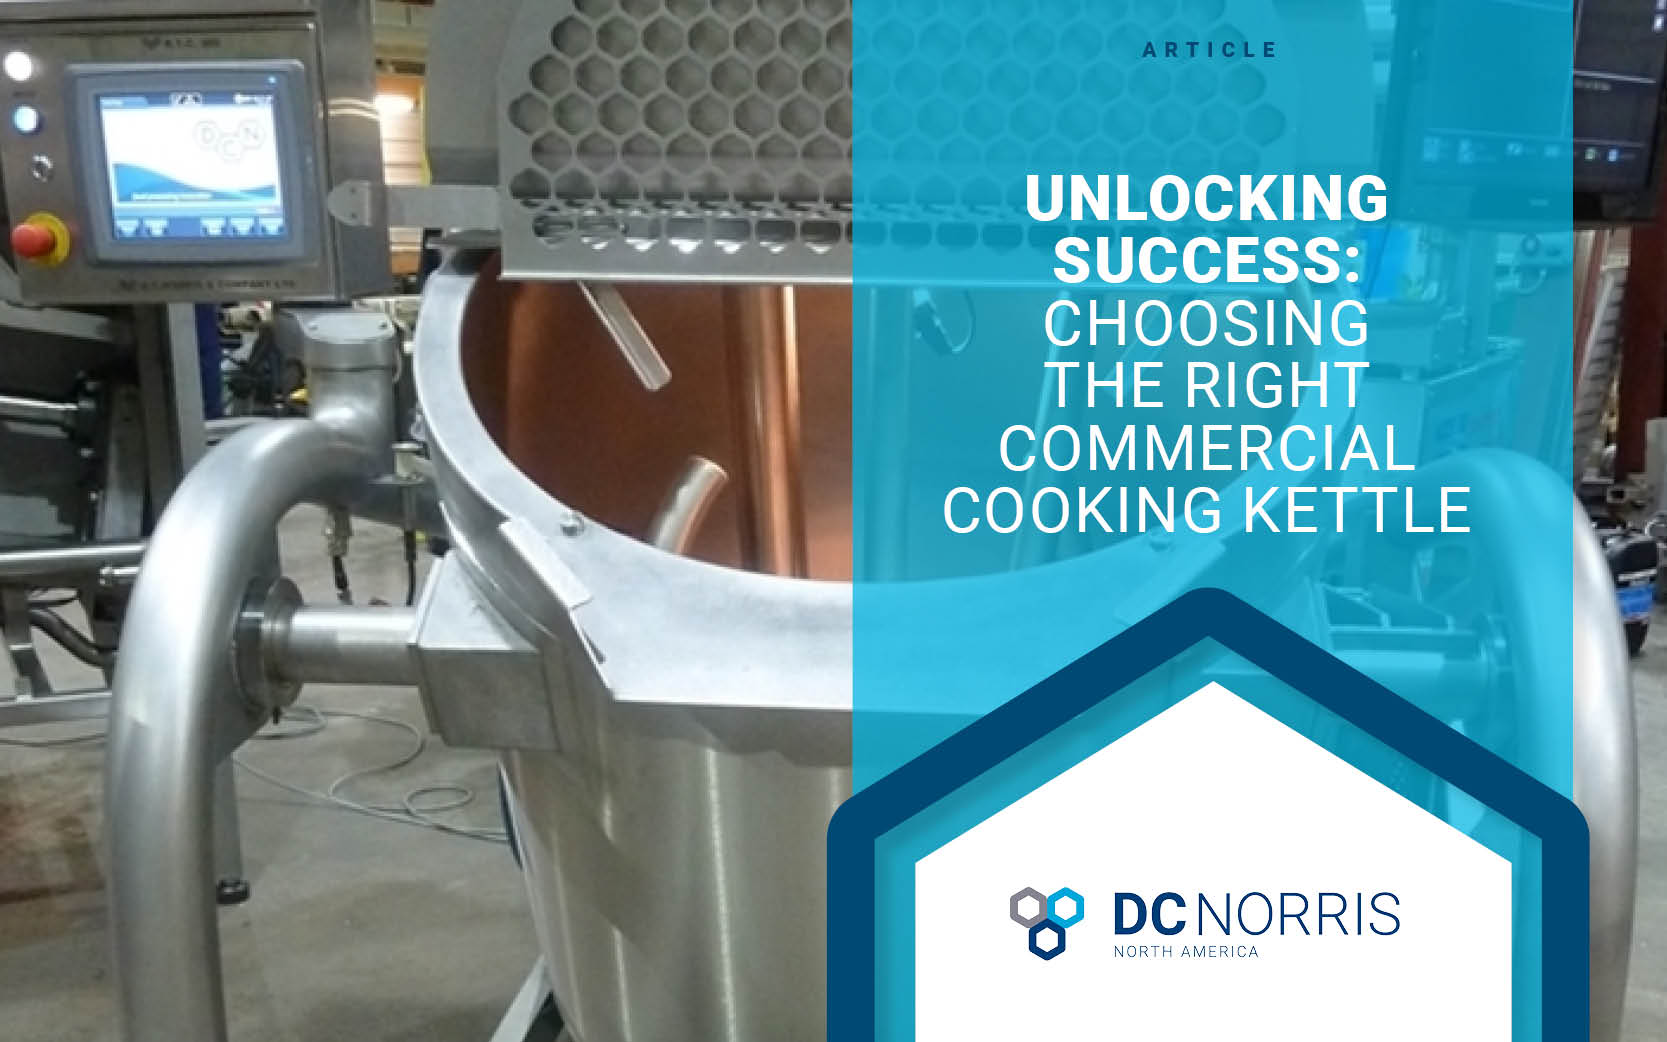 the all stainless steel ready-to-cook tilting commercial cooking kettle is in the background of this image behind a headline that reads: Unlocking Success: Choosing the Right Commercial Cooking Kettle. The headline is above the DC Norris North America logo.